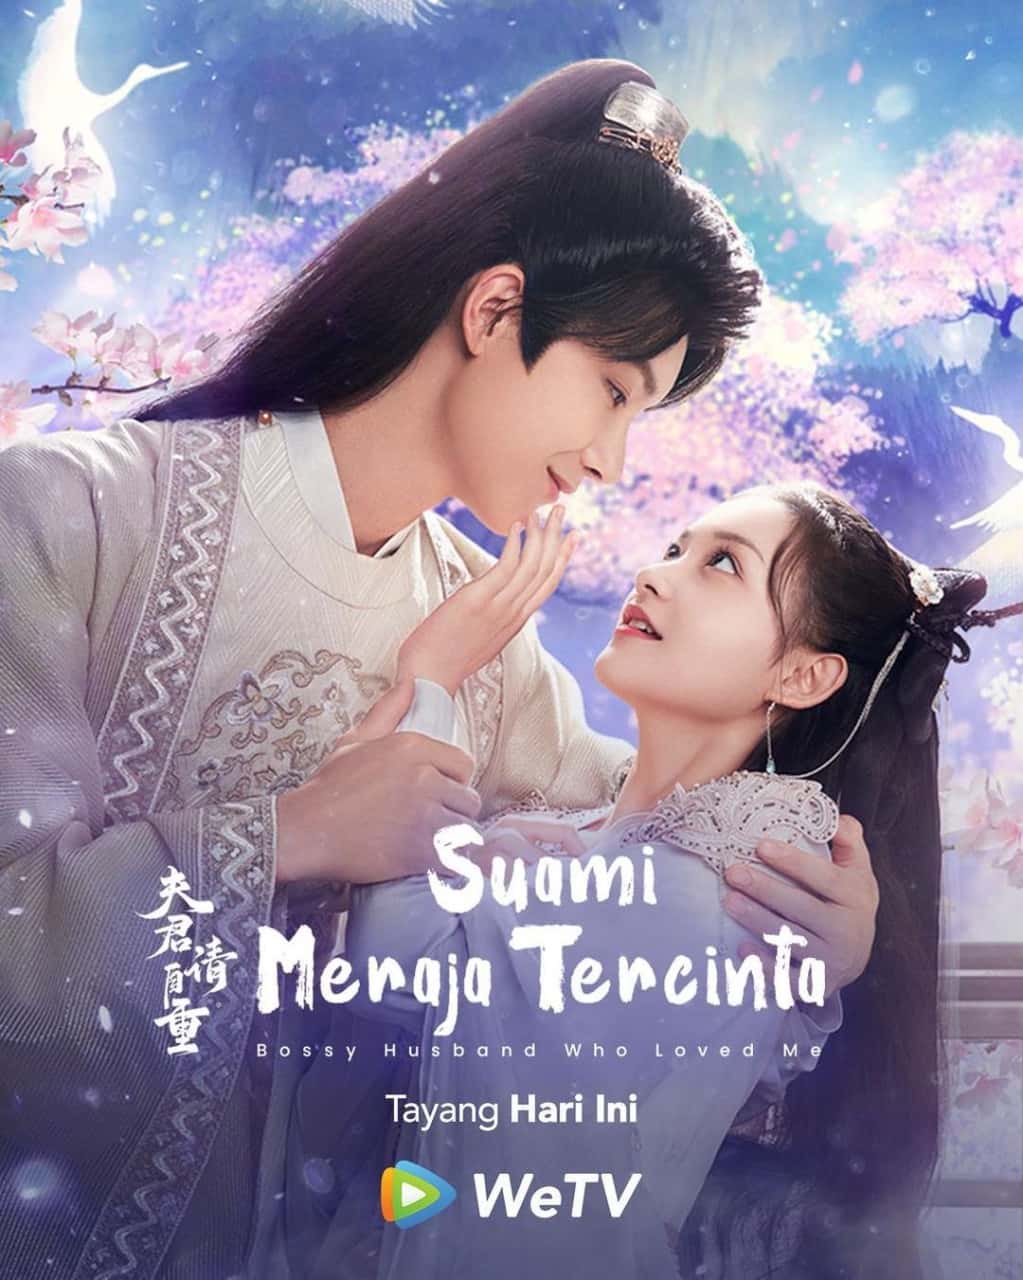 Bossy Husband Who Loved Me - Sinopsis, Pemain, OST, Episode, Review